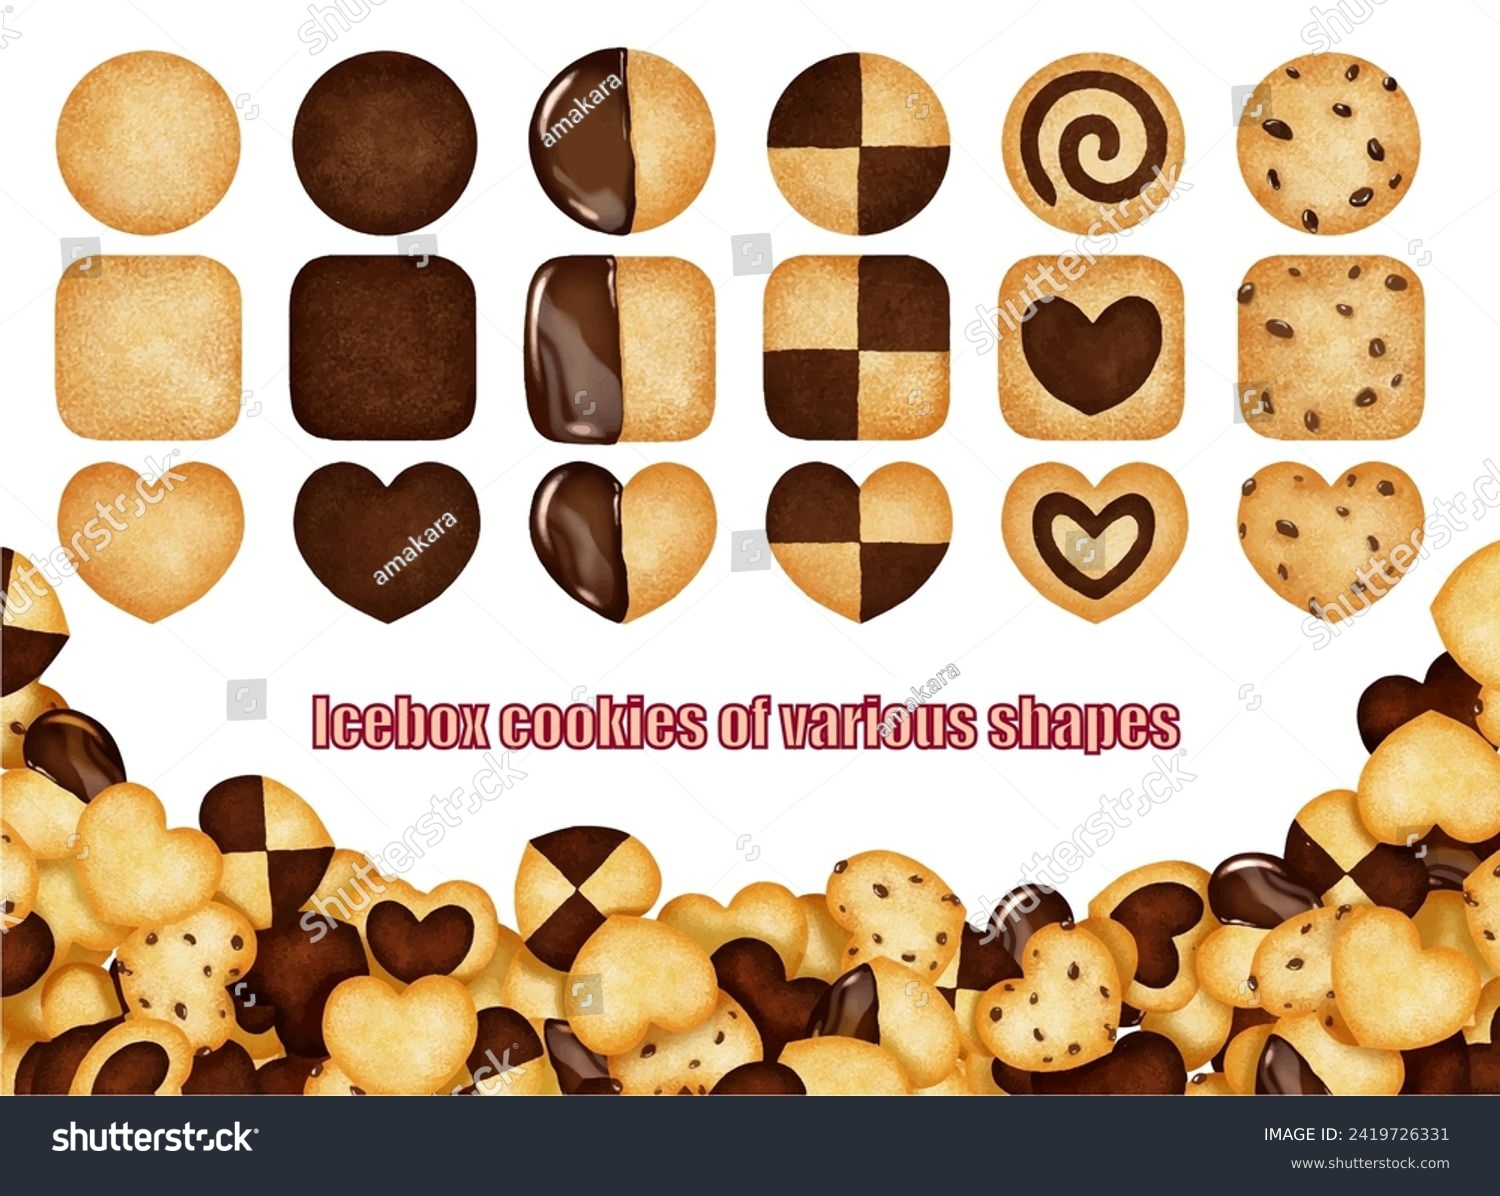 SVG of Icebox cookies of various shapes svg